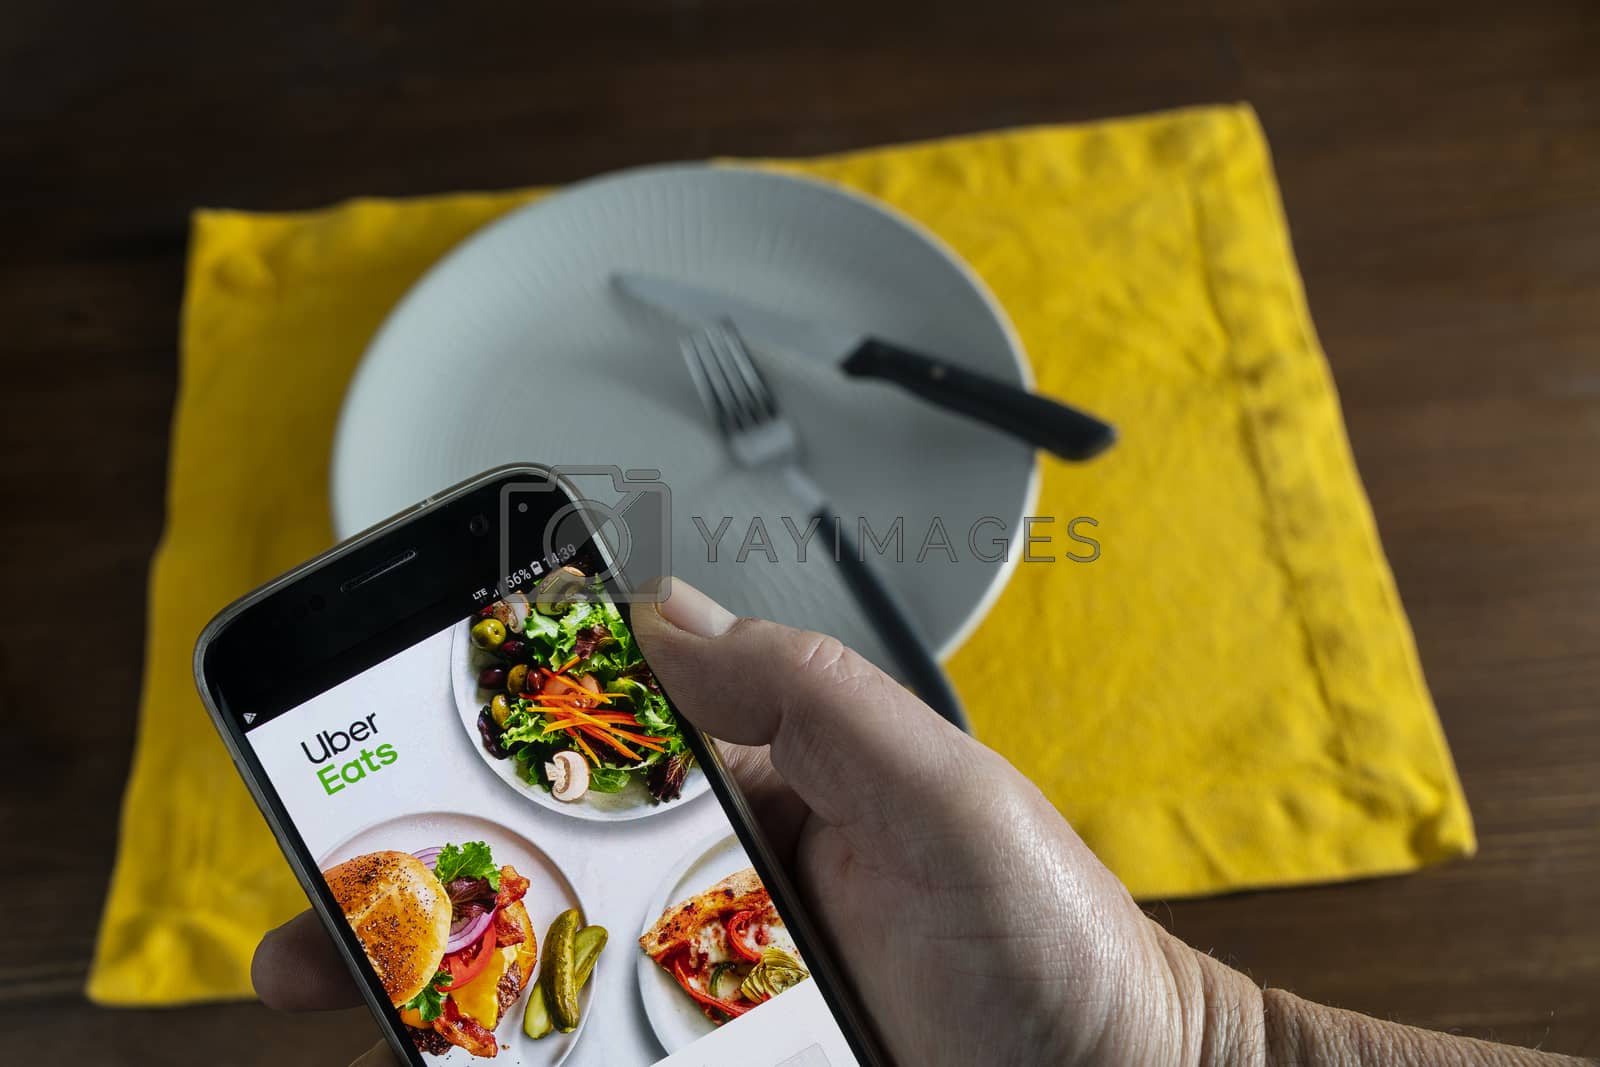 Royalty free image of Just Eat app on mobile phone by sergiodv